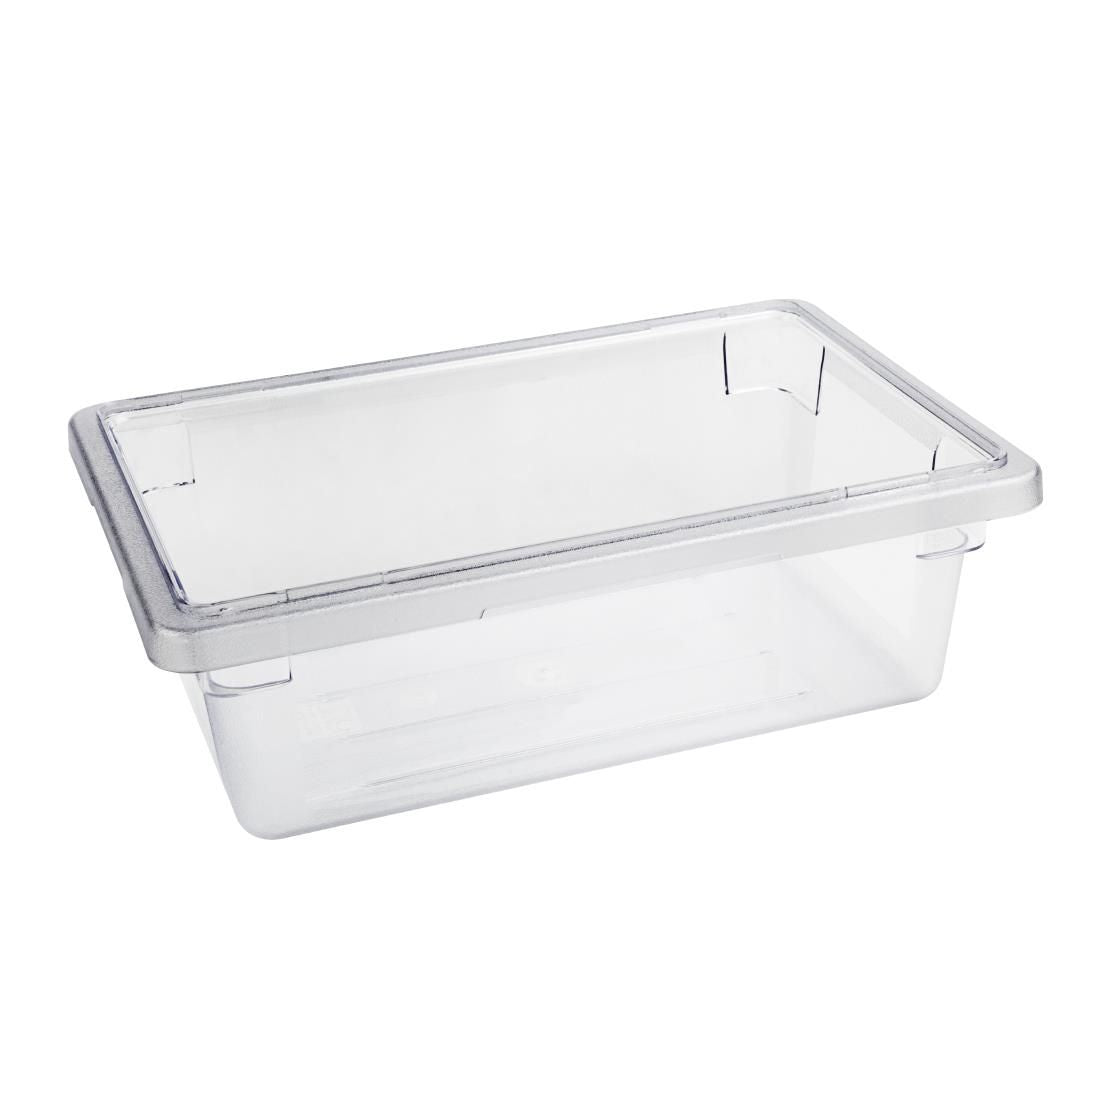 CG984 Vogue Polycarbonate Container 12Ltr JD Catering Equipment Solutions Ltd